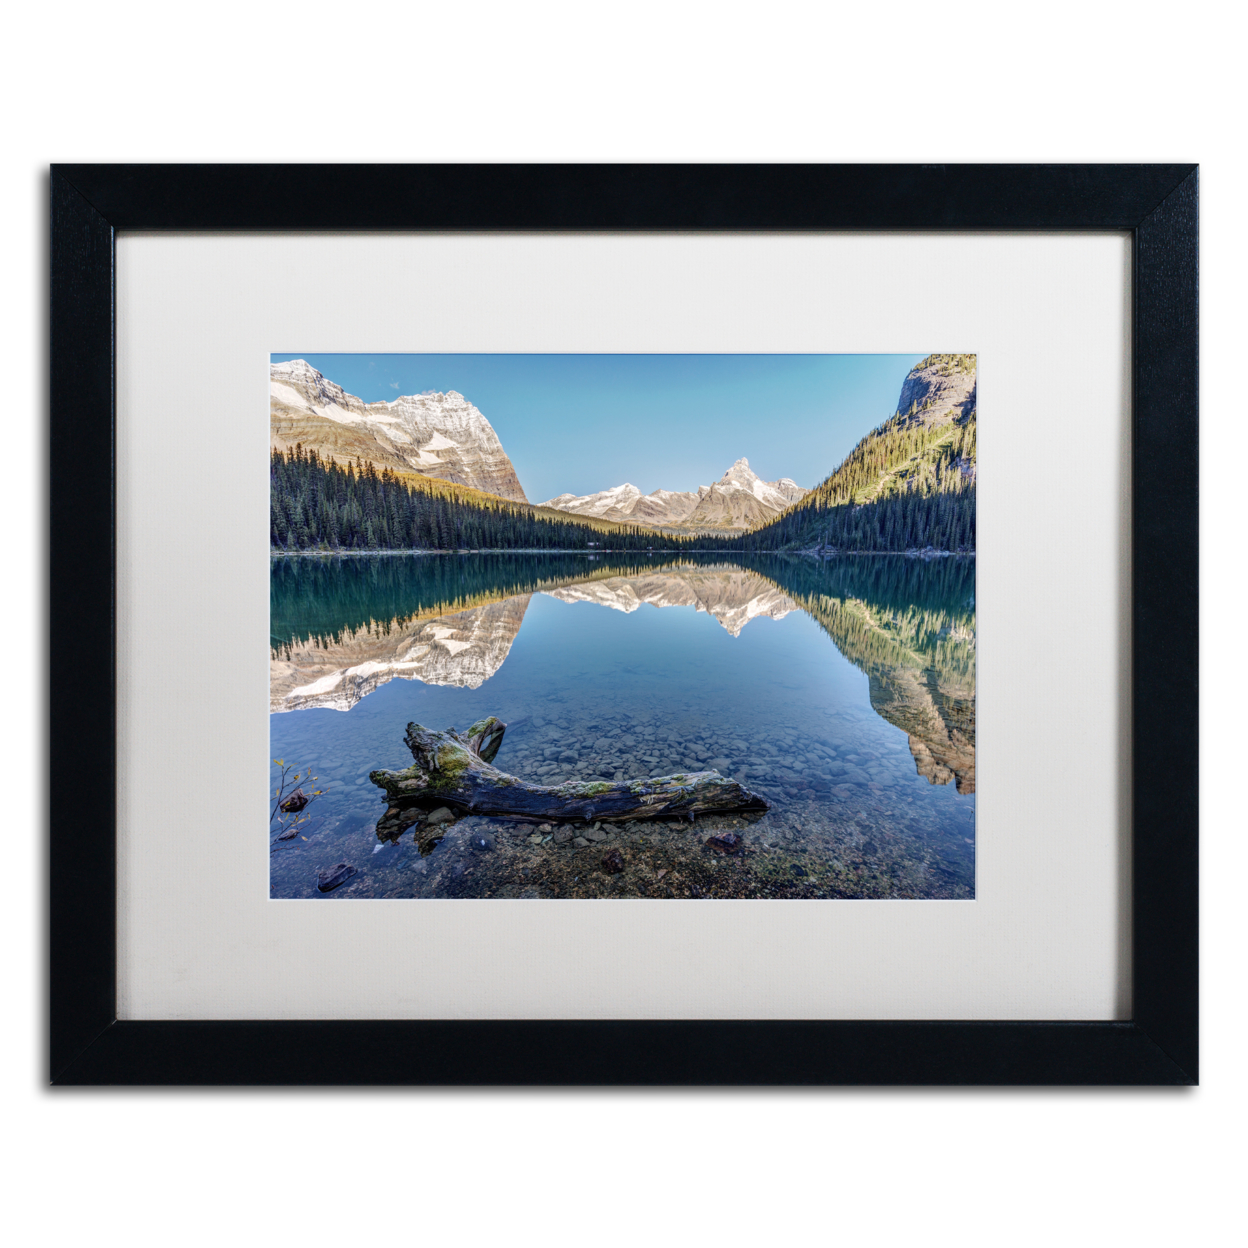 Pierre Leclerc 'Lake O'Hara Reflection' Black Wooden Framed Art 18 X 22 Inches